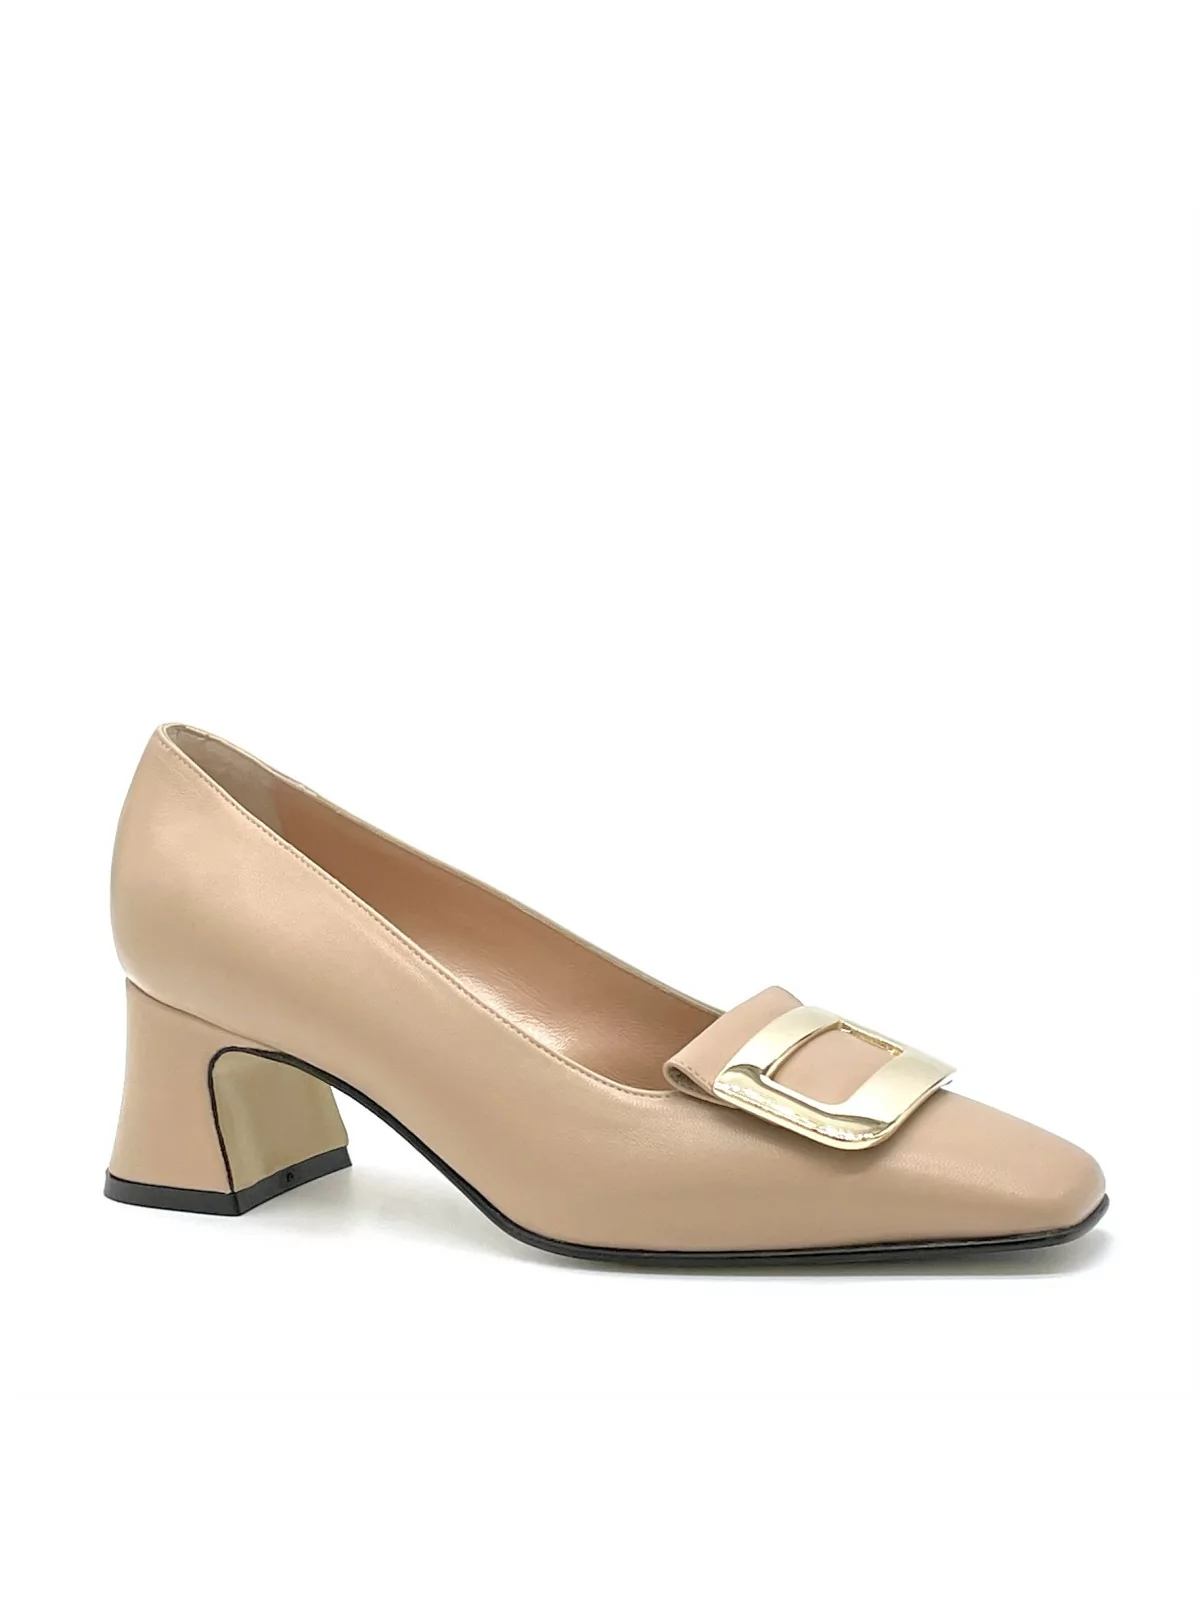 Light beige leather pump with gold metal buckle. Leather lining, leather and rub